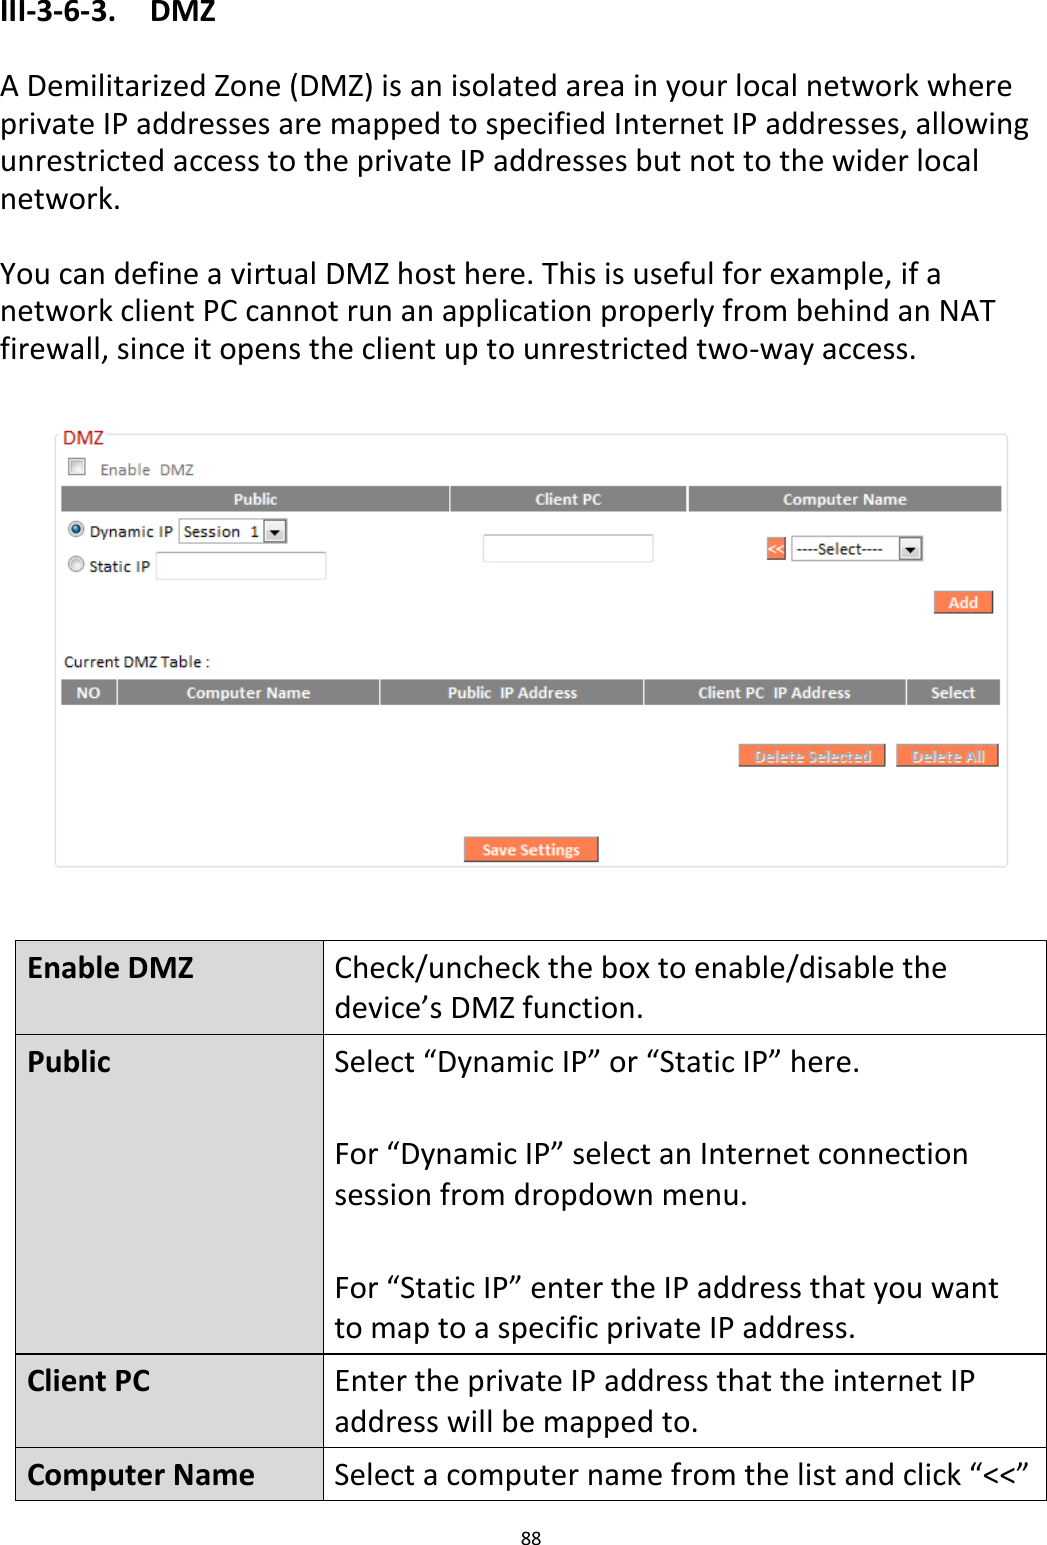 88  III-3-6-3.  DMZ  A Demilitarized Zone (DMZ) is an isolated area in your local network where private IP addresses are mapped to specified Internet IP addresses, allowing unrestricted access to the private IP addresses but not to the wider local network.  You can define a virtual DMZ host here. This is useful for example, if a network client PC cannot run an application properly from behind an NAT firewall, since it opens the client up to unrestricted two-way access.    Enable DMZ Check/uncheck the box to enable/disable the device’s DMZ function. Public Select “Dynamic IP” or “Static IP” here.  For “Dynamic IP” select an Internet connection session from dropdown menu.  For “Static IP” enter the IP address that you want to map to a specific private IP address. Client PC Enter the private IP address that the internet IP address will be mapped to. Computer Name Select a computer name from the list and click “&lt;&lt;” 